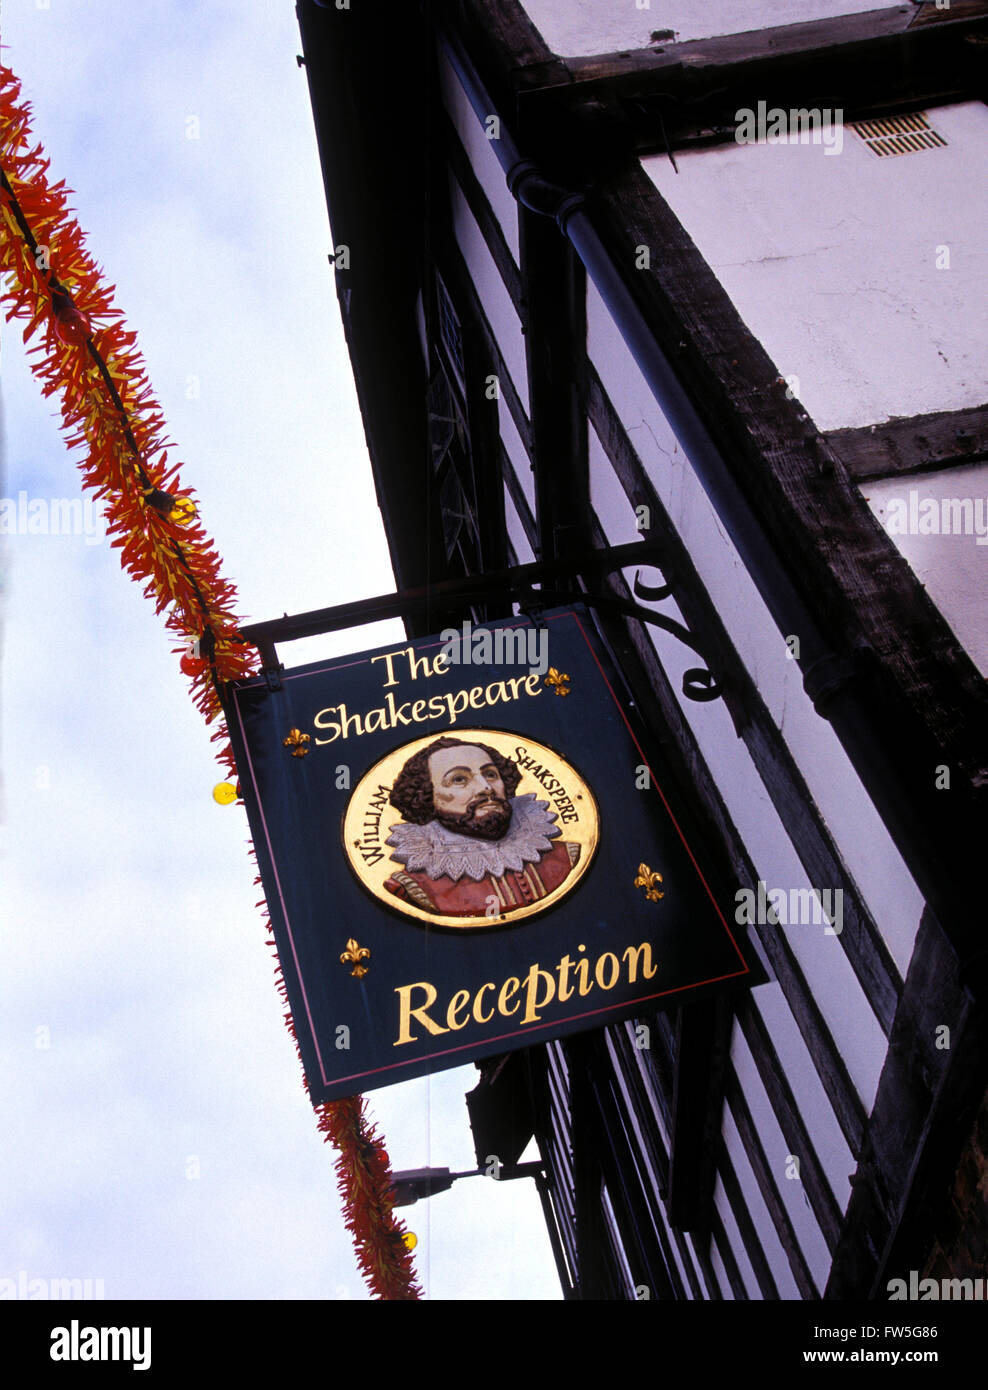 William Shakespeare - portrait of the English poet and playwright on a sign for 'The Shakespeare' pub, Stratford-upon-Avon, Stock Photo